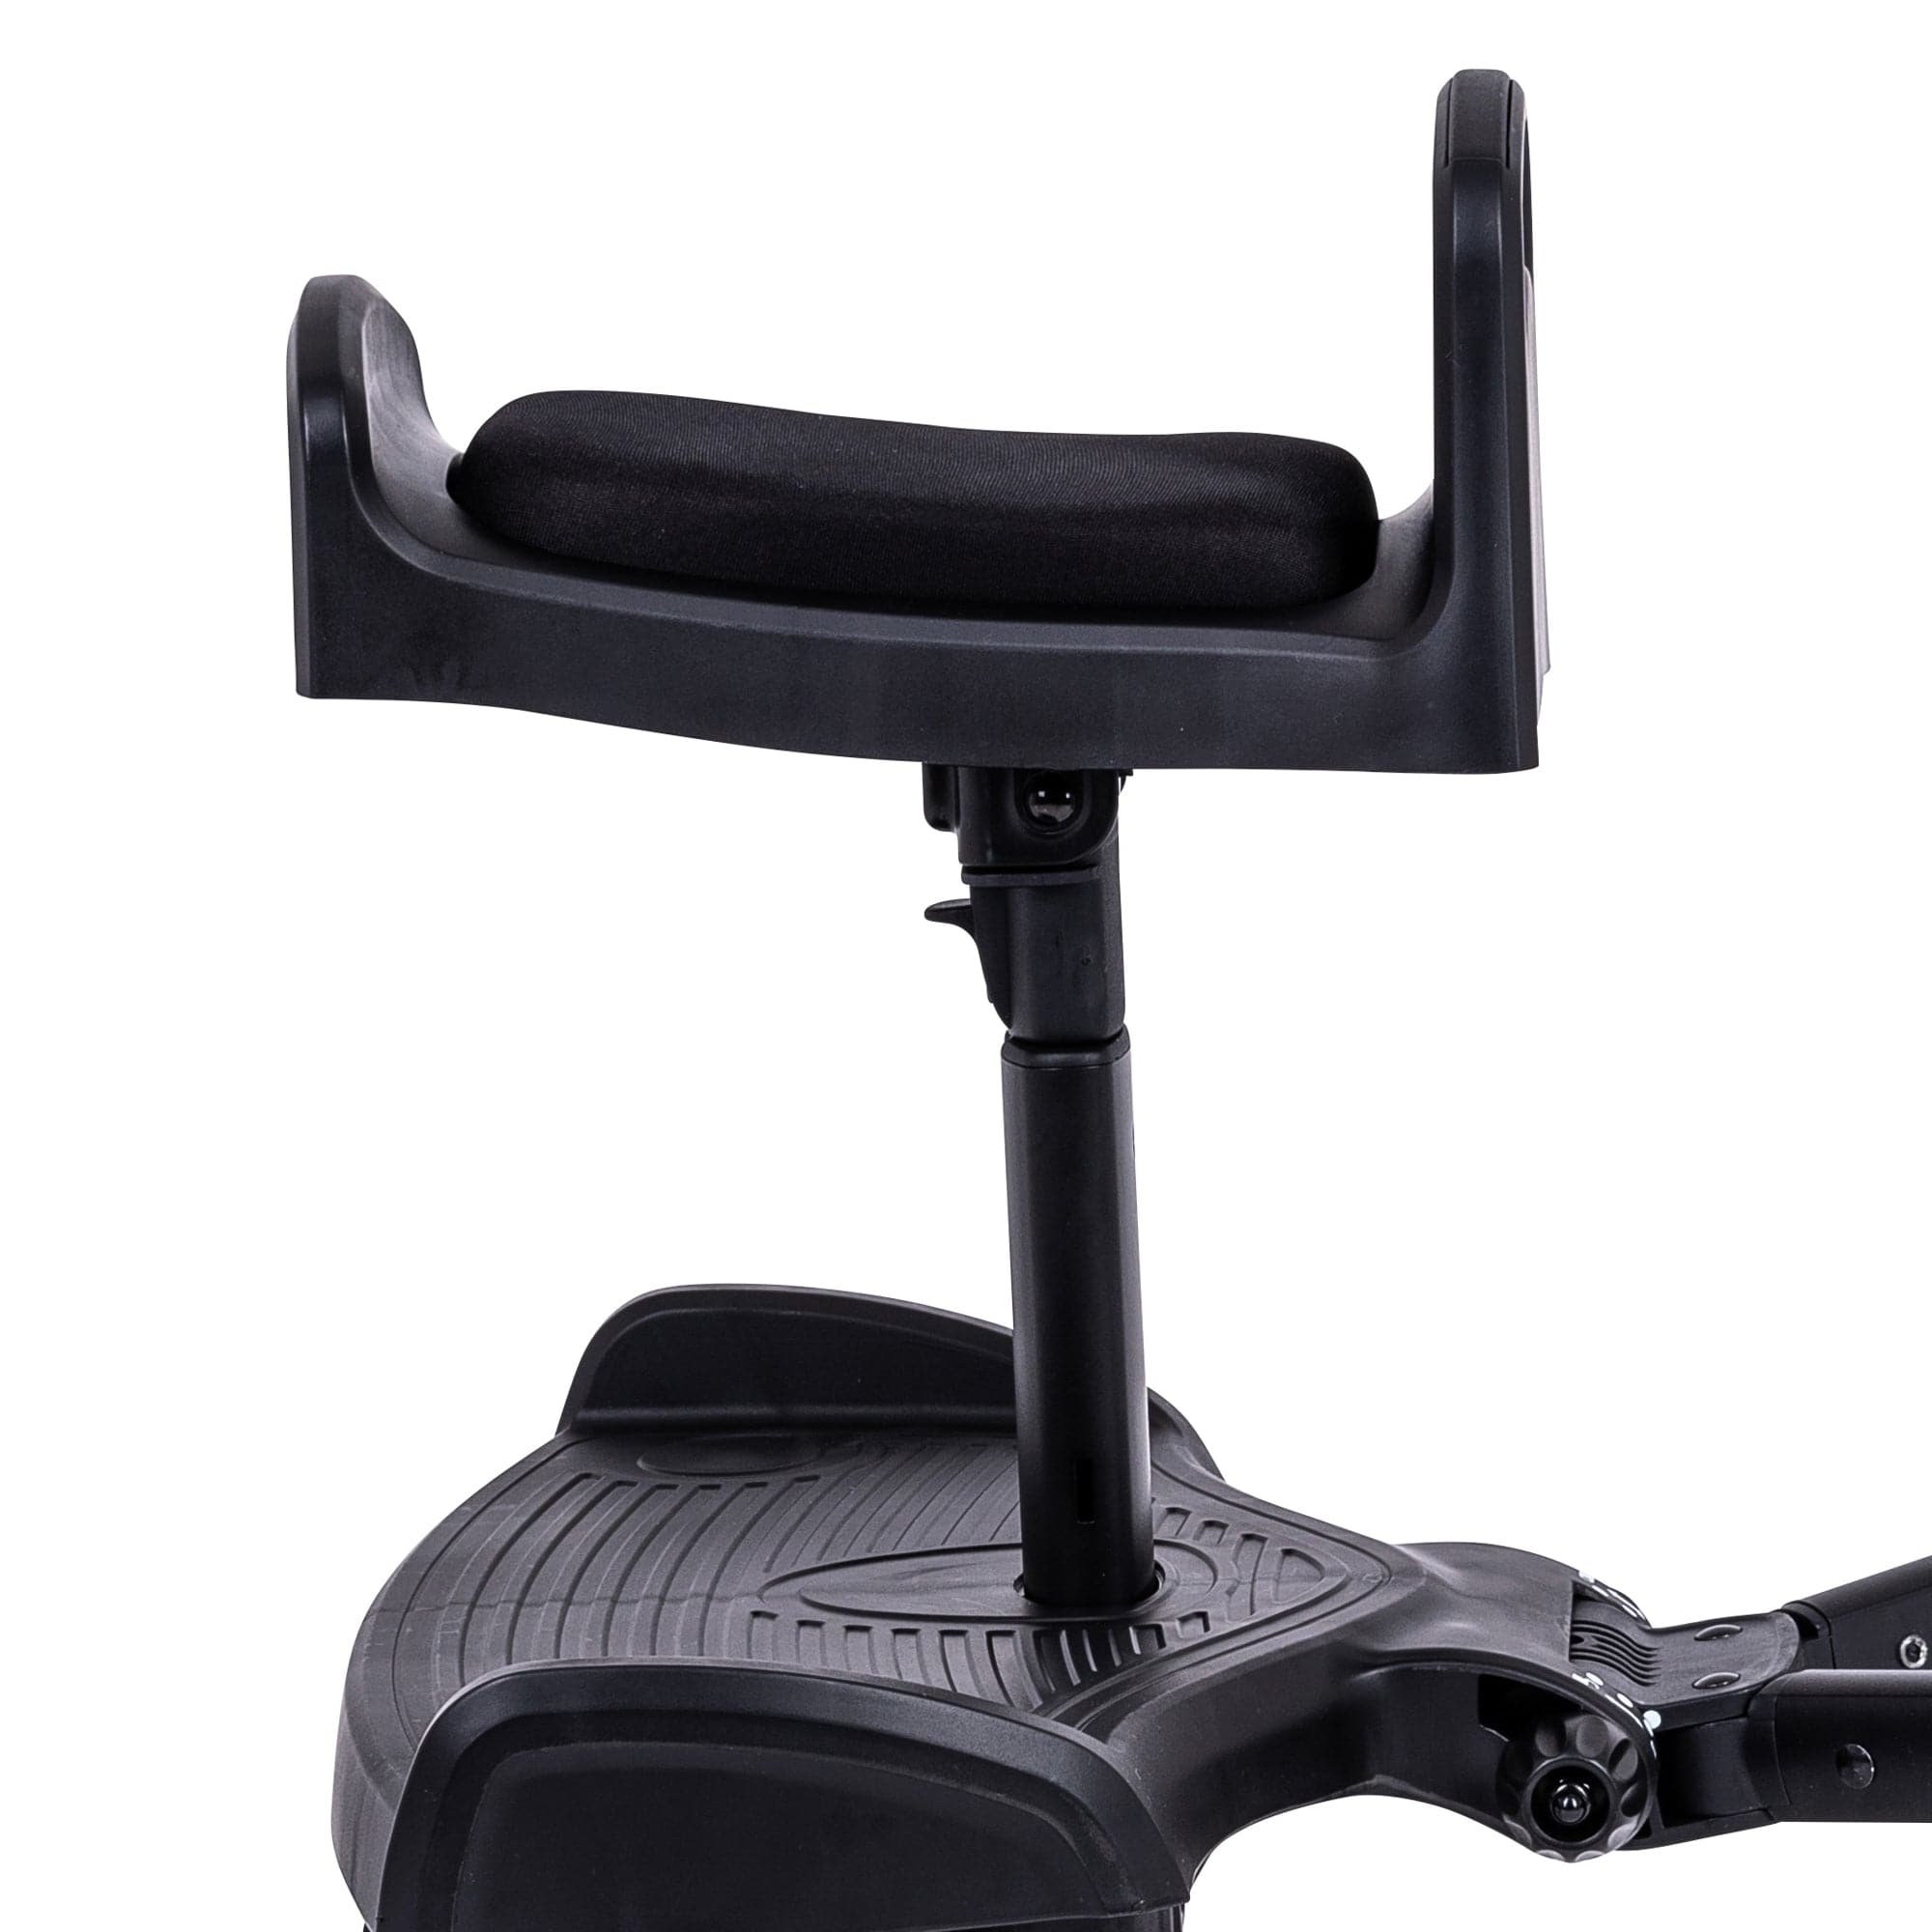 Ride On Board with Seat Compatible with Valco - For Your Little One